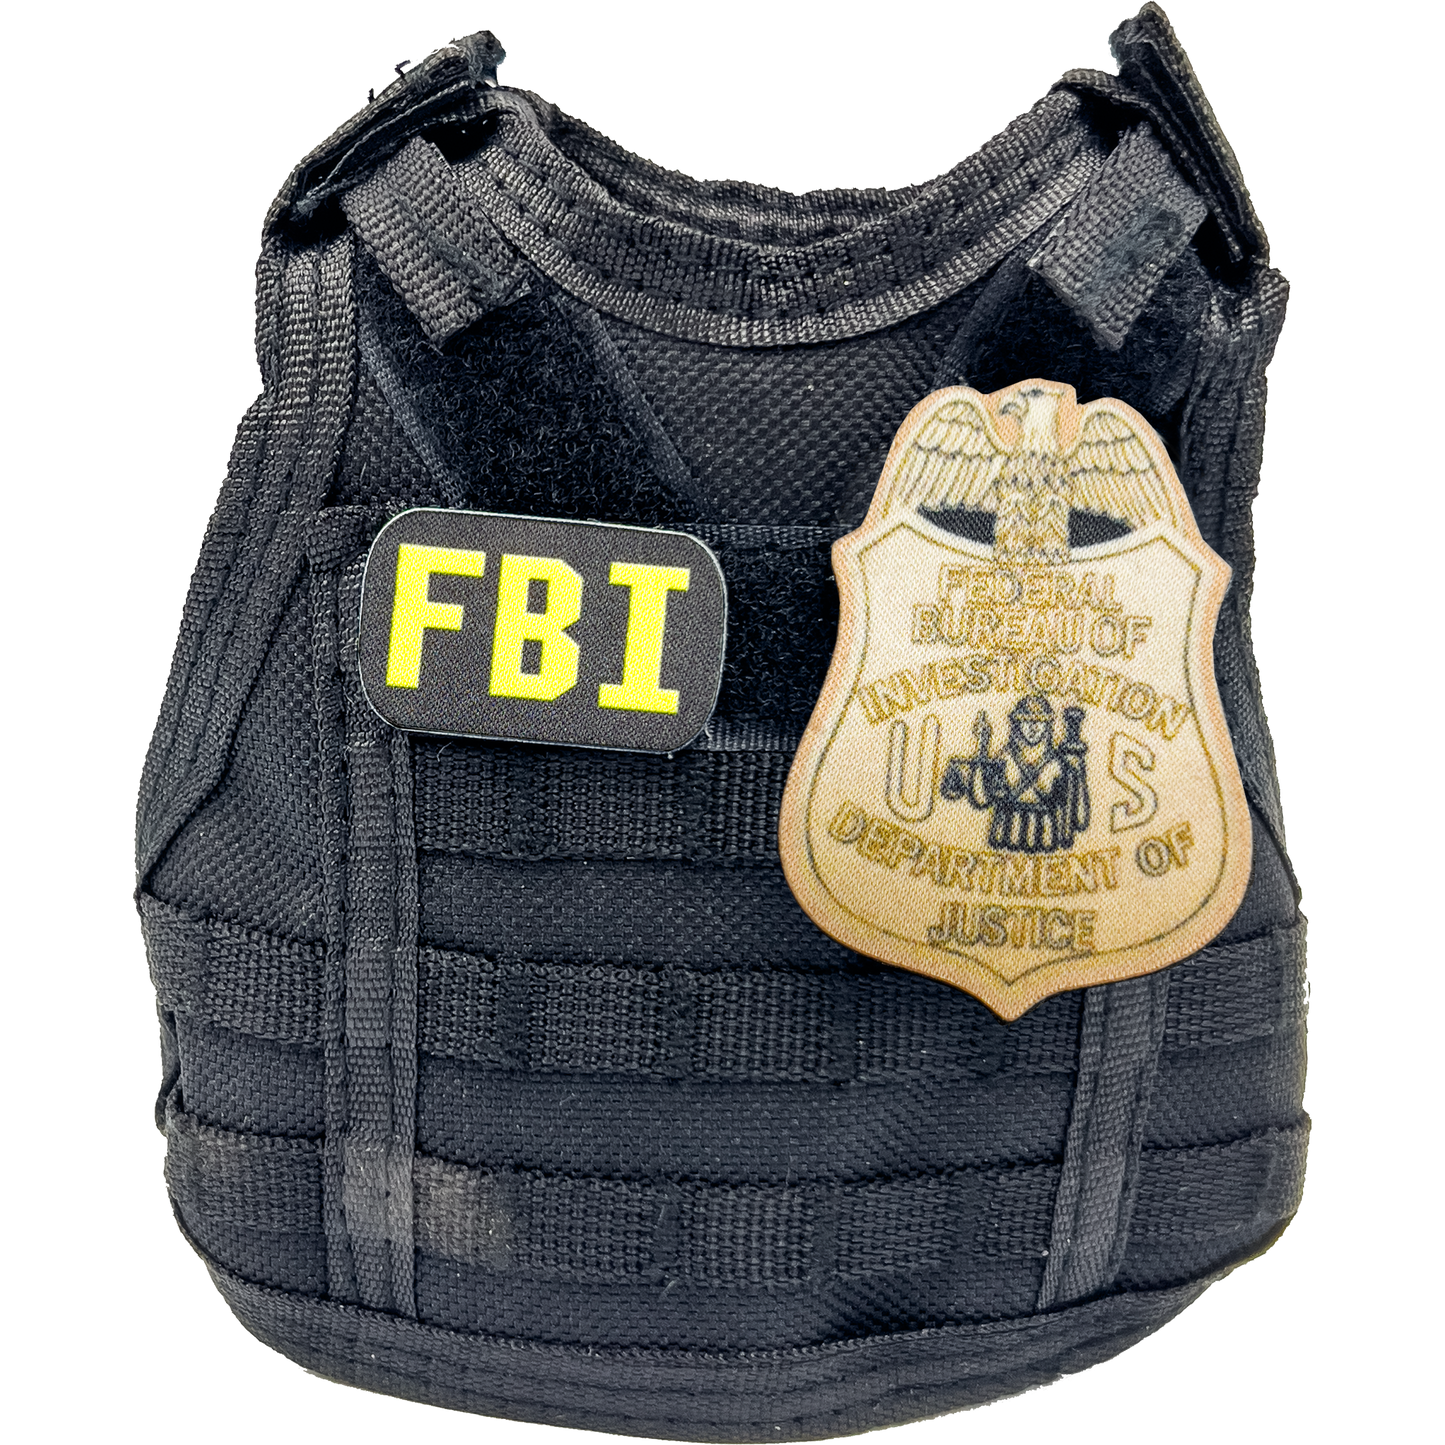 BL1-014 FBI SPECIAL AGENT Tactical Beverage Bottle or Can Cooler Vest with removable patches perfect gift for Challenge Coin collectors